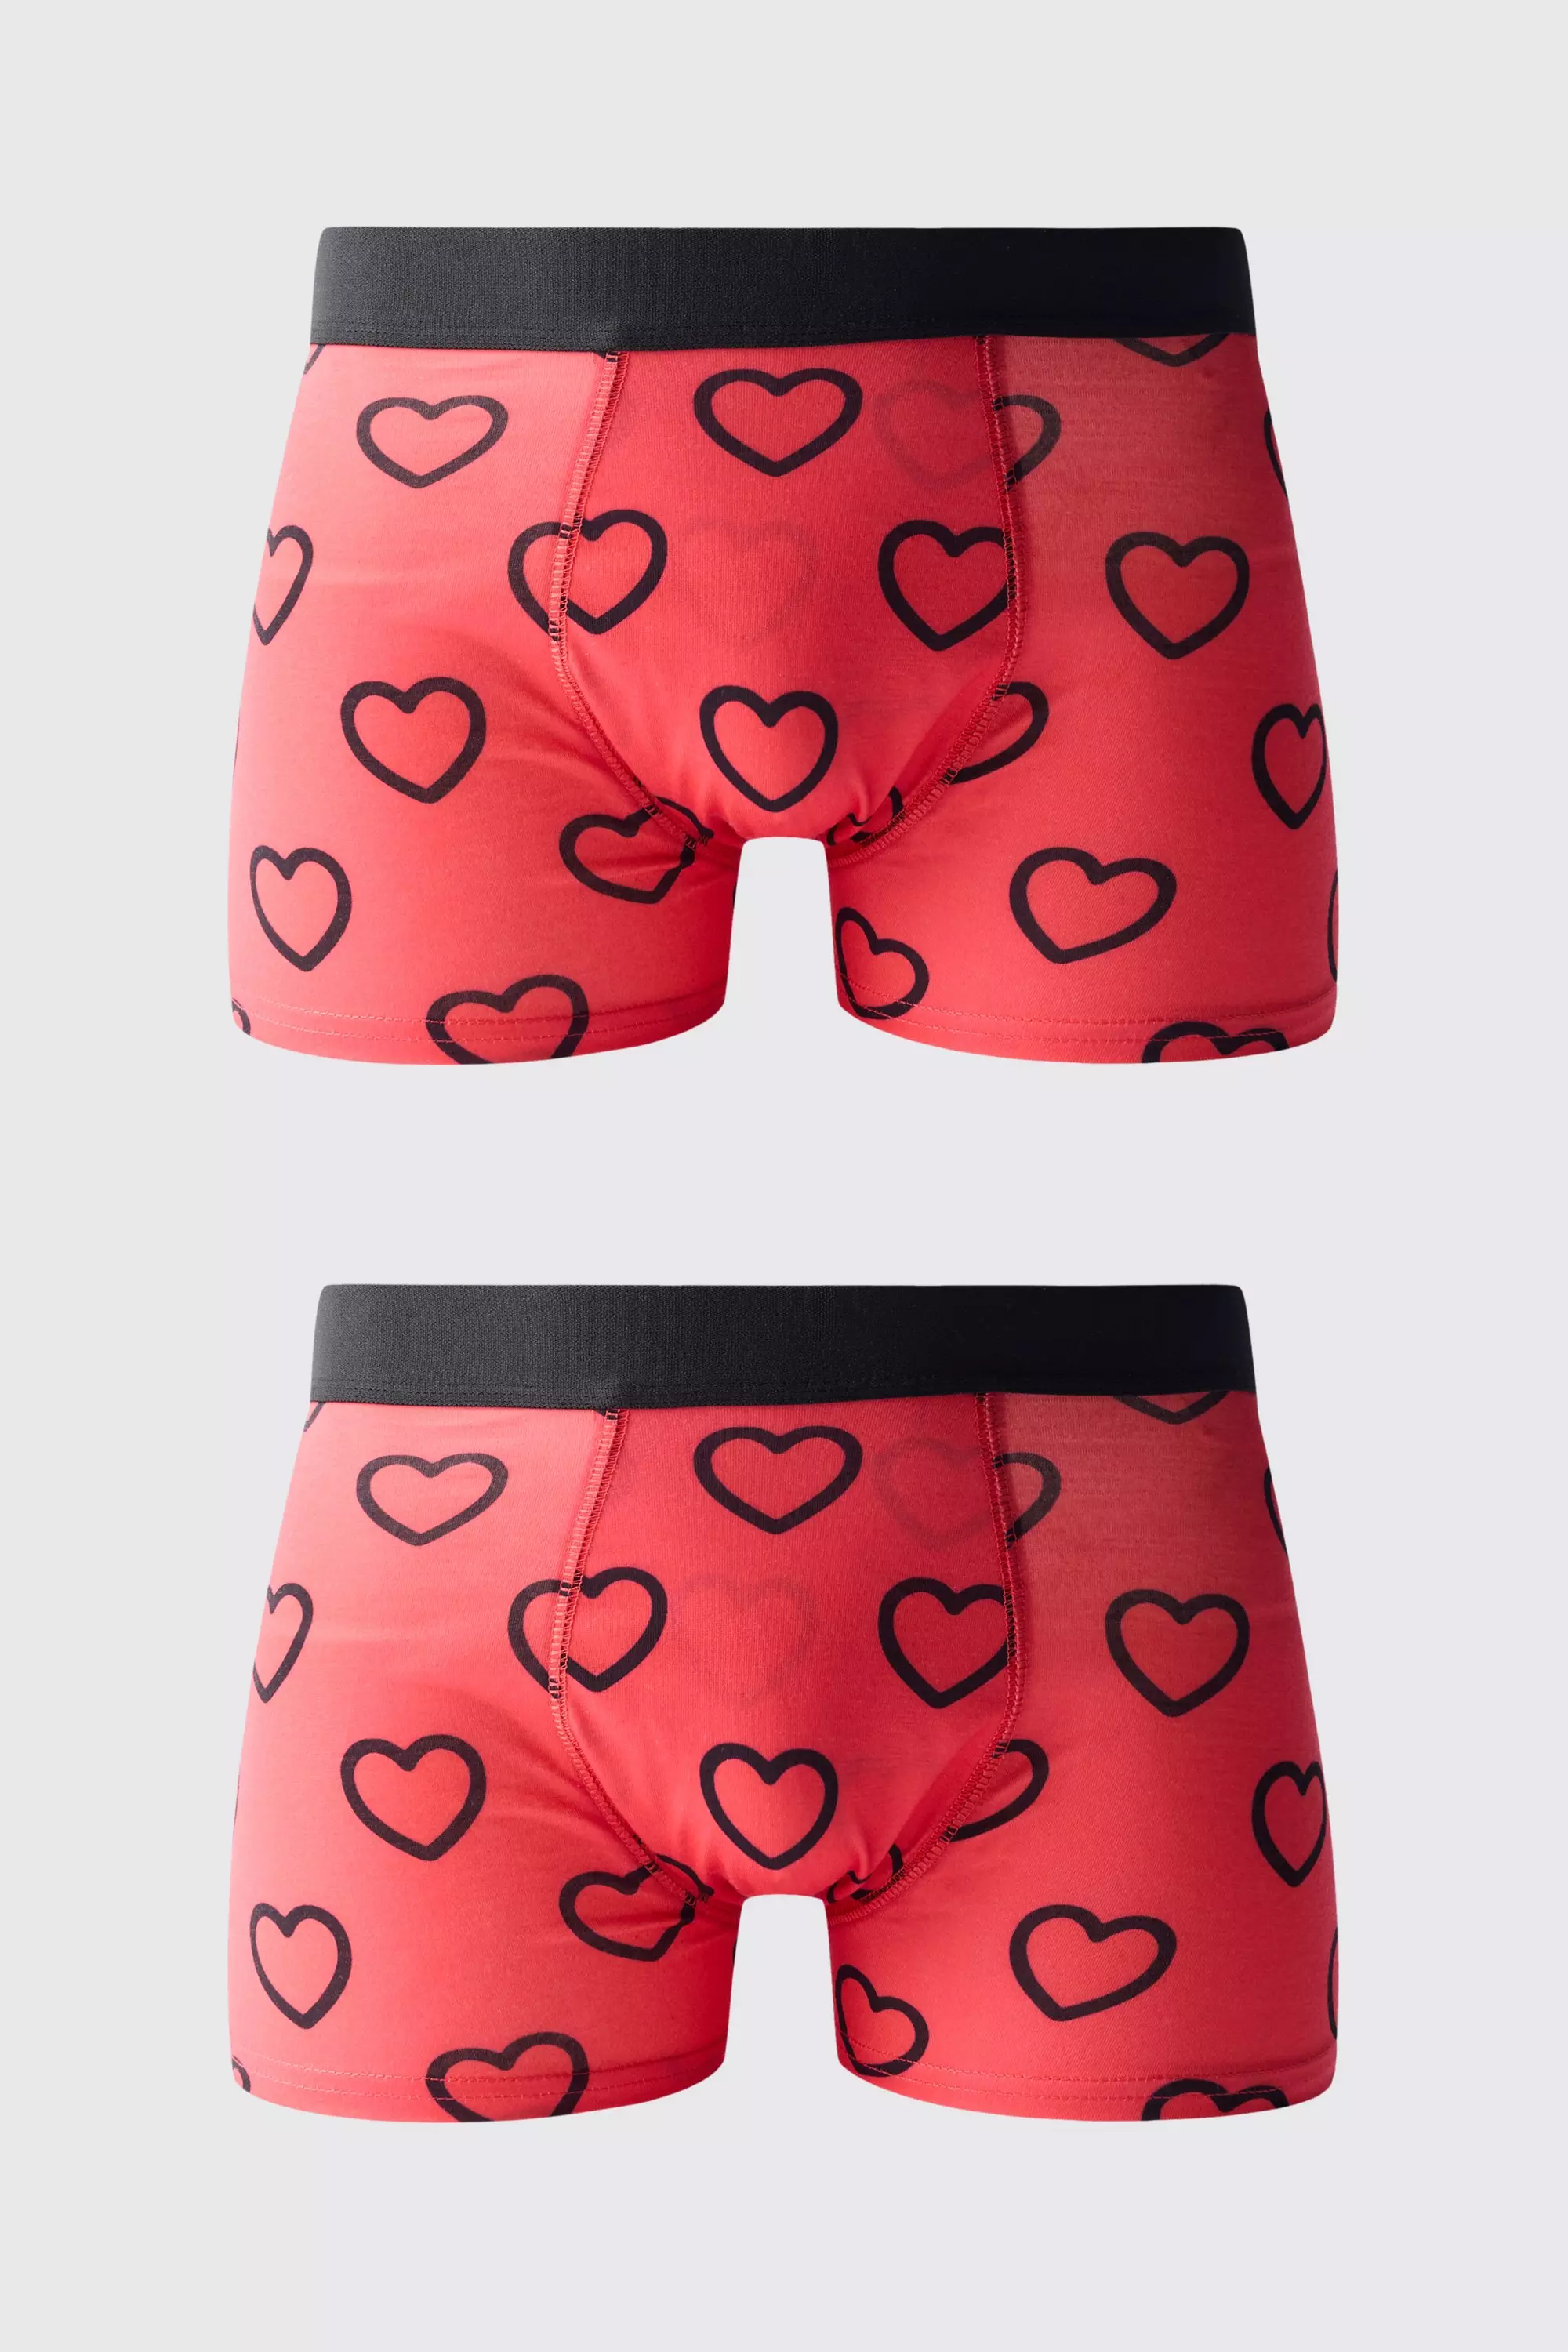 Boxers Hearts